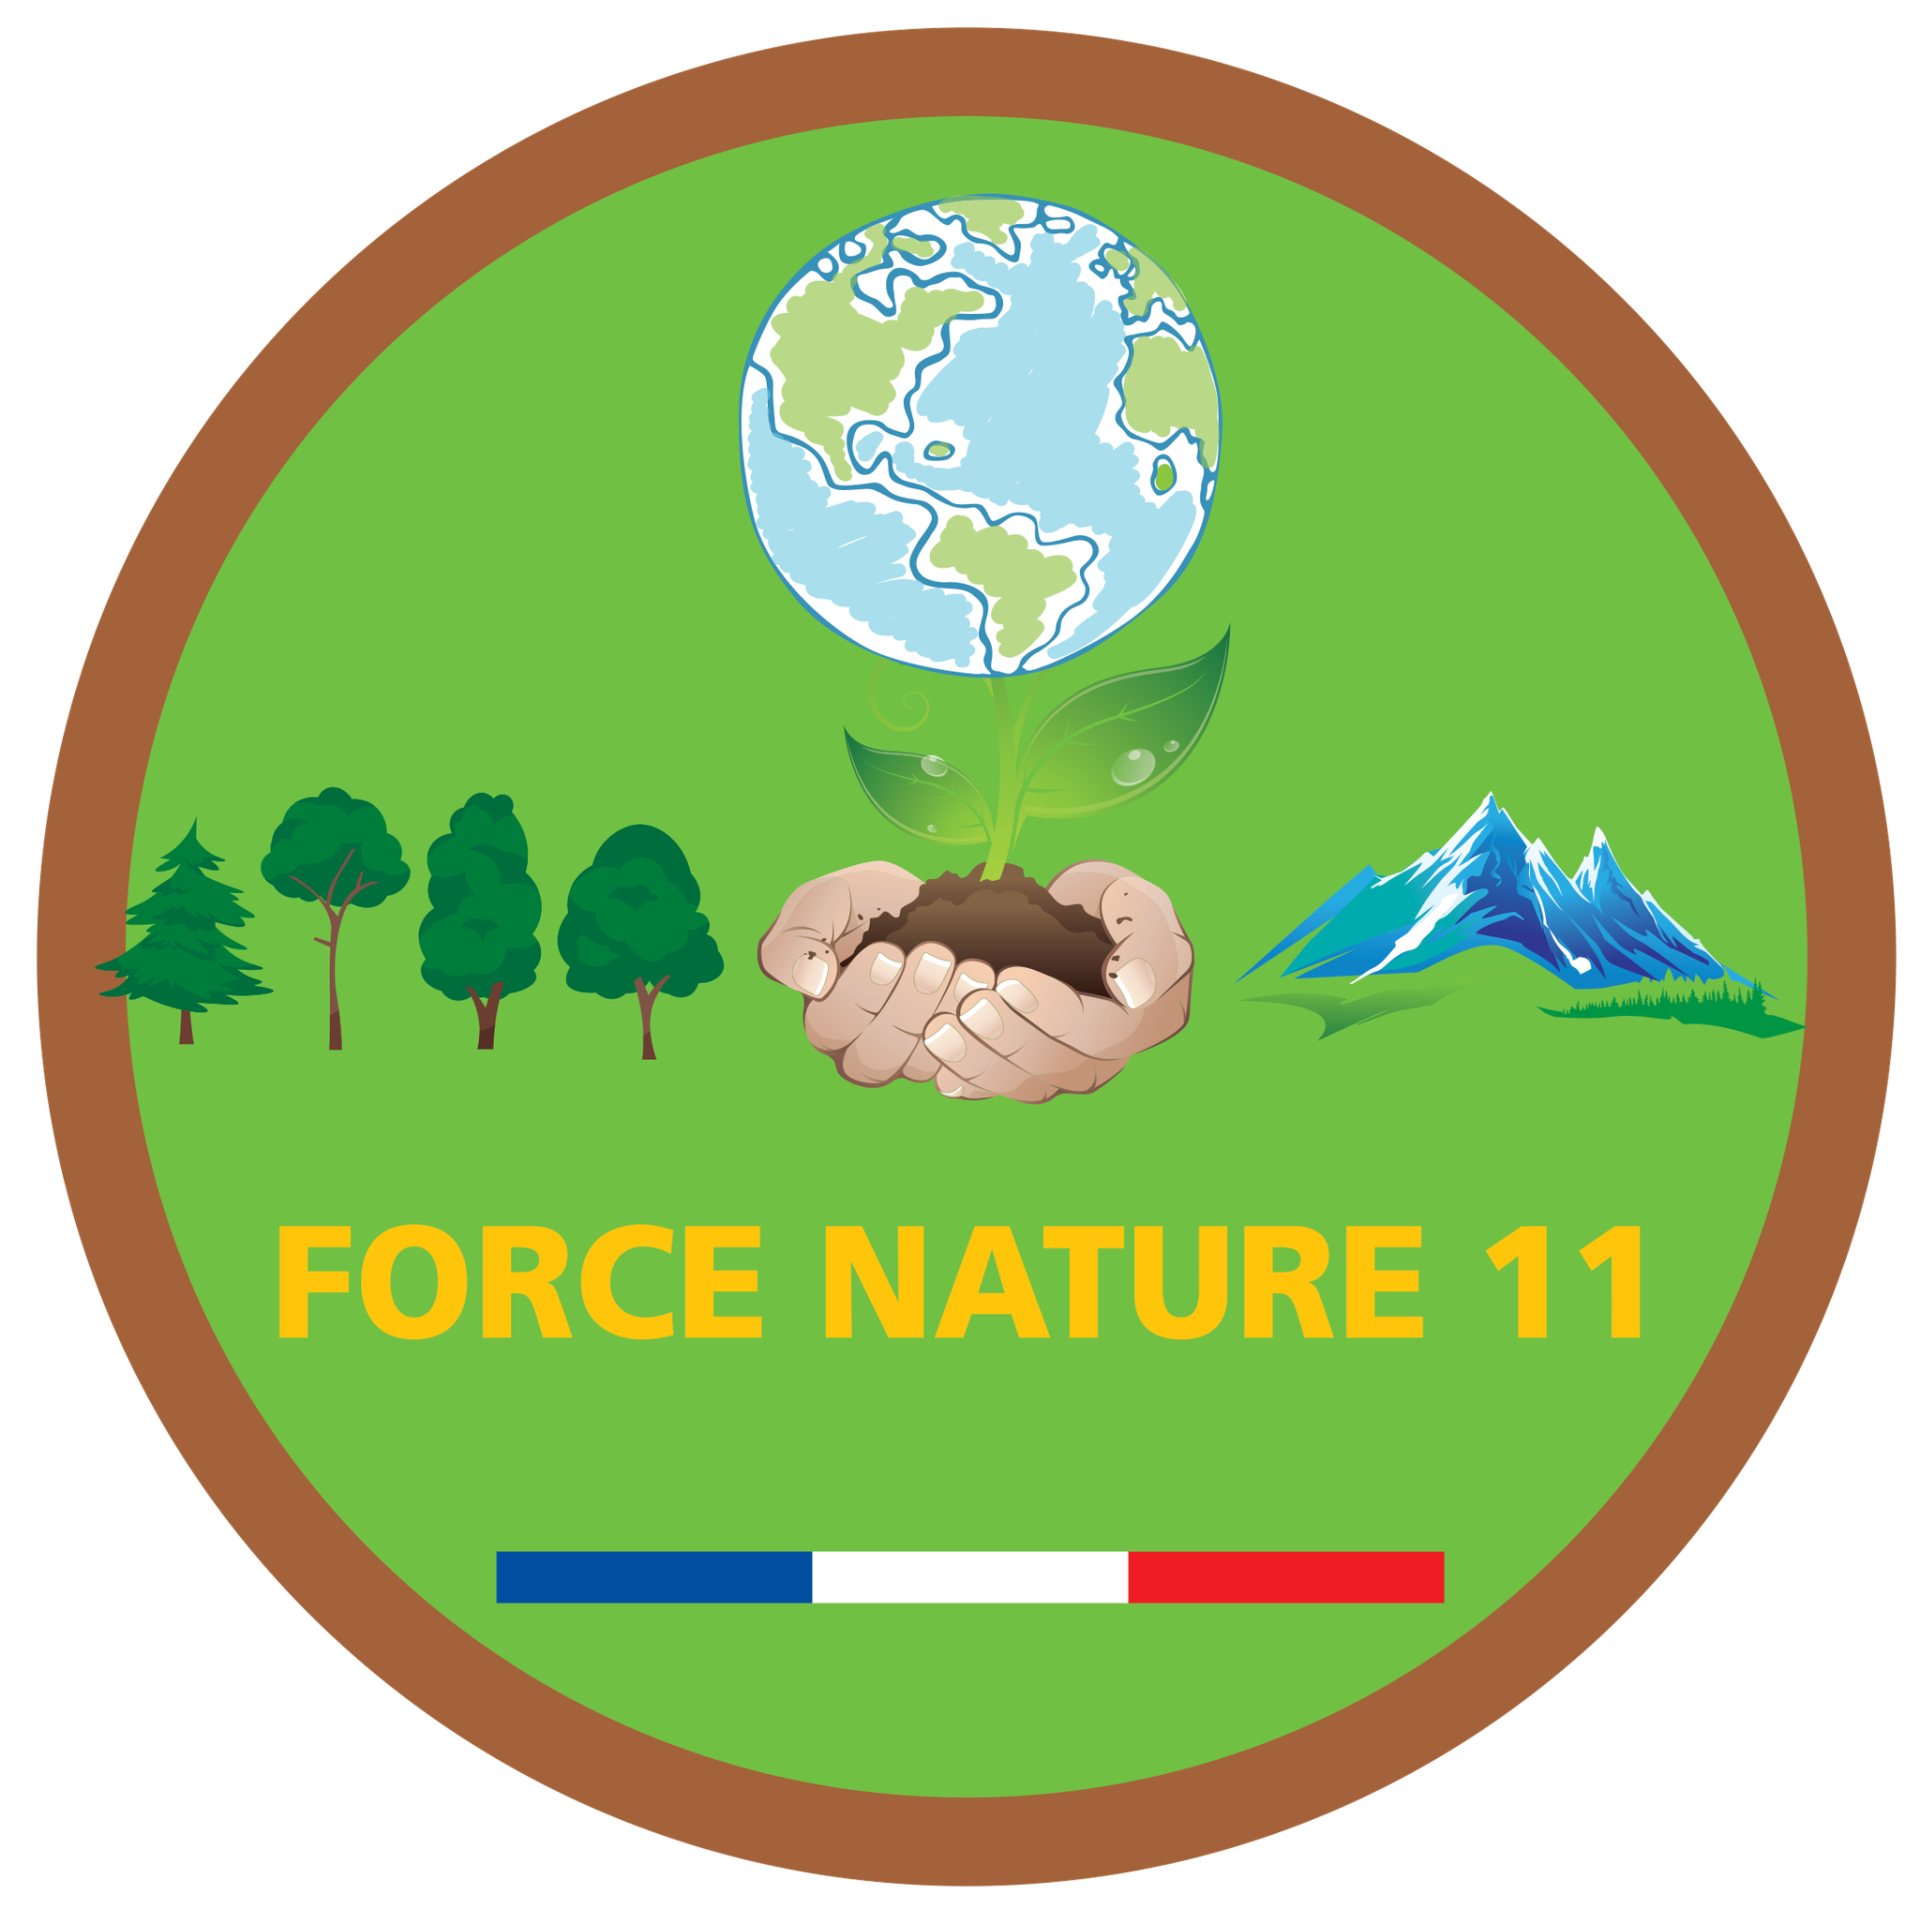 FORCE NATURE 11